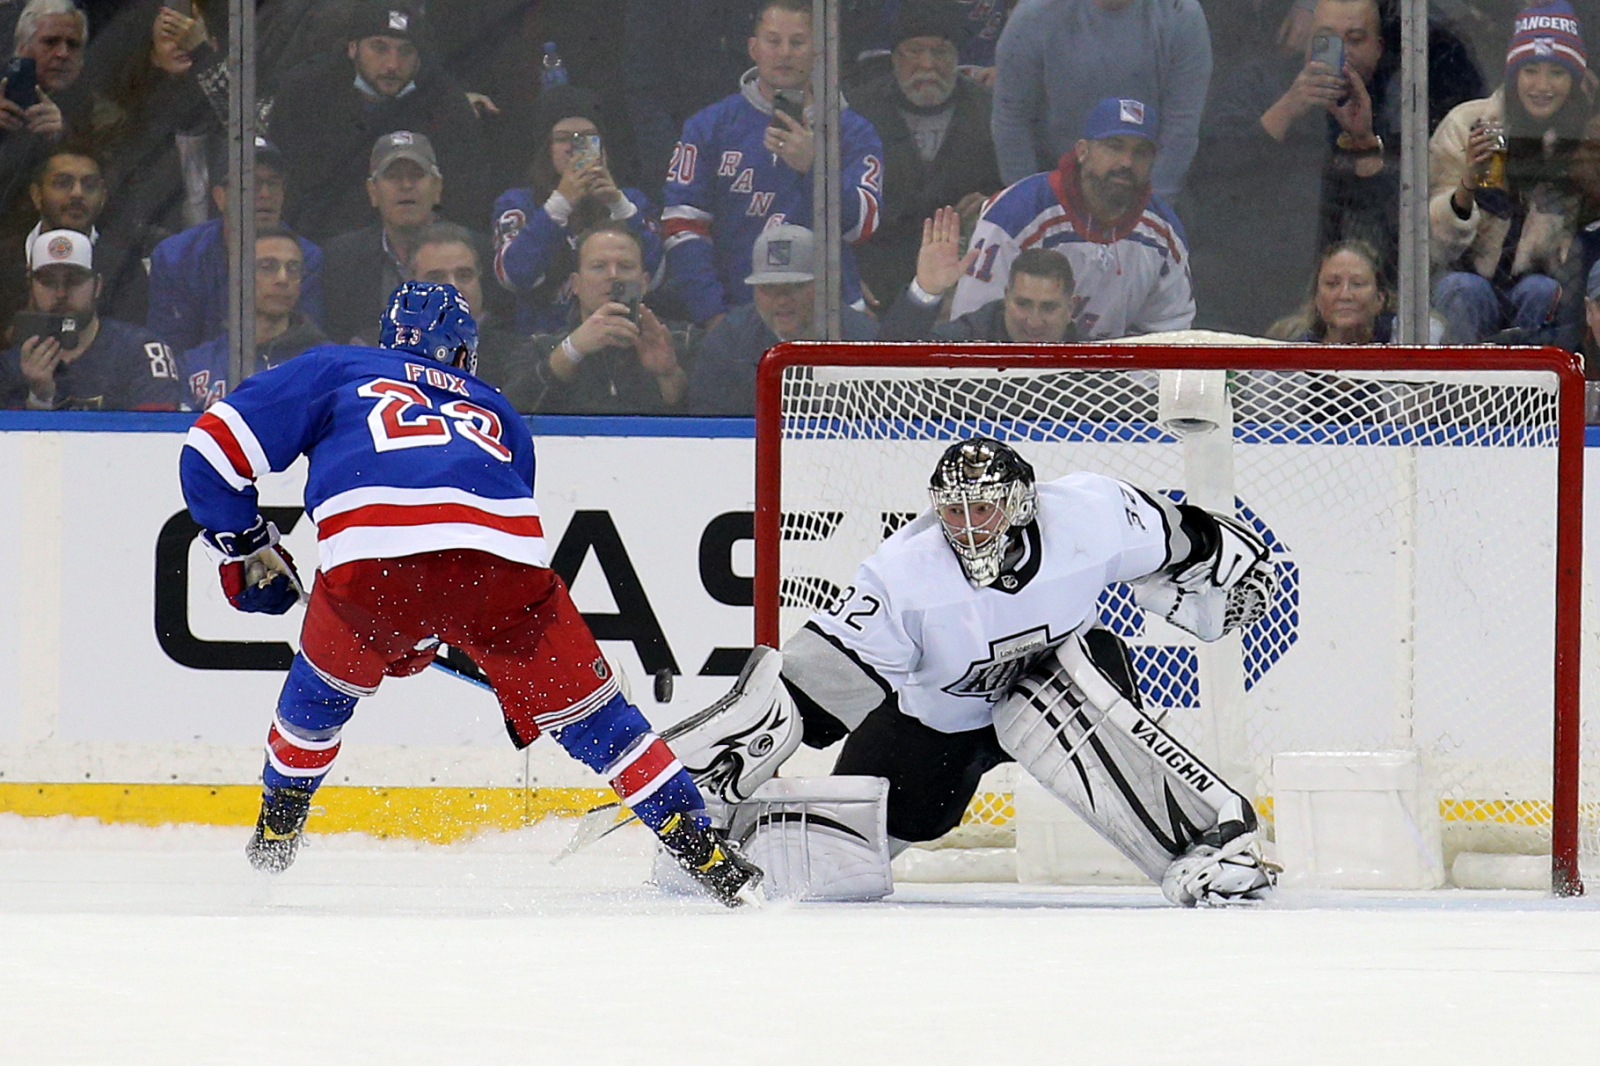 Jonathan Quick's Expectations With the New York Rangers